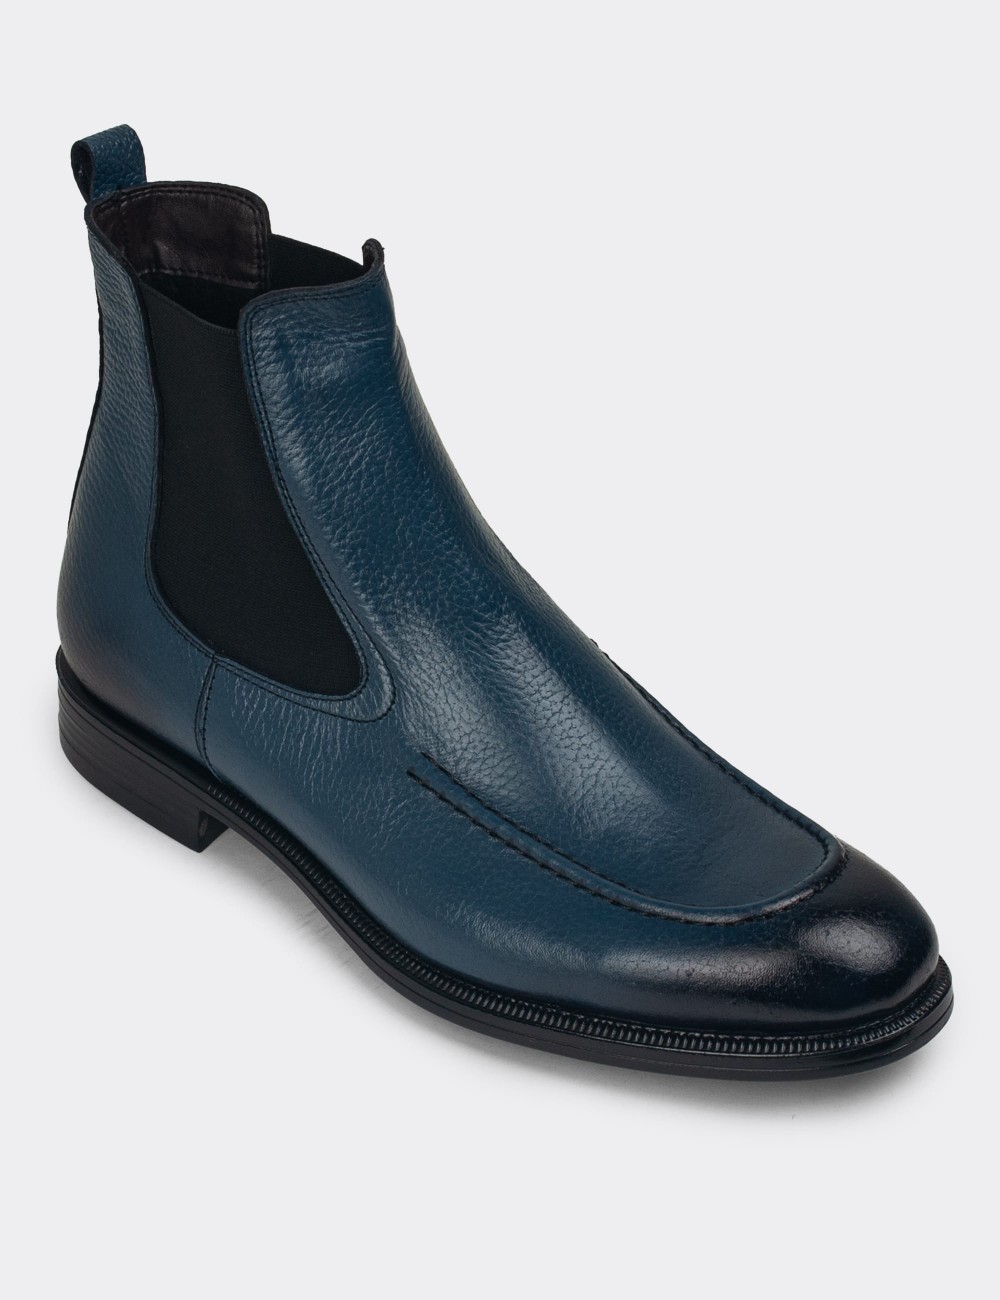 Blue Leather Chelsea Boots - 01953MMVIC01